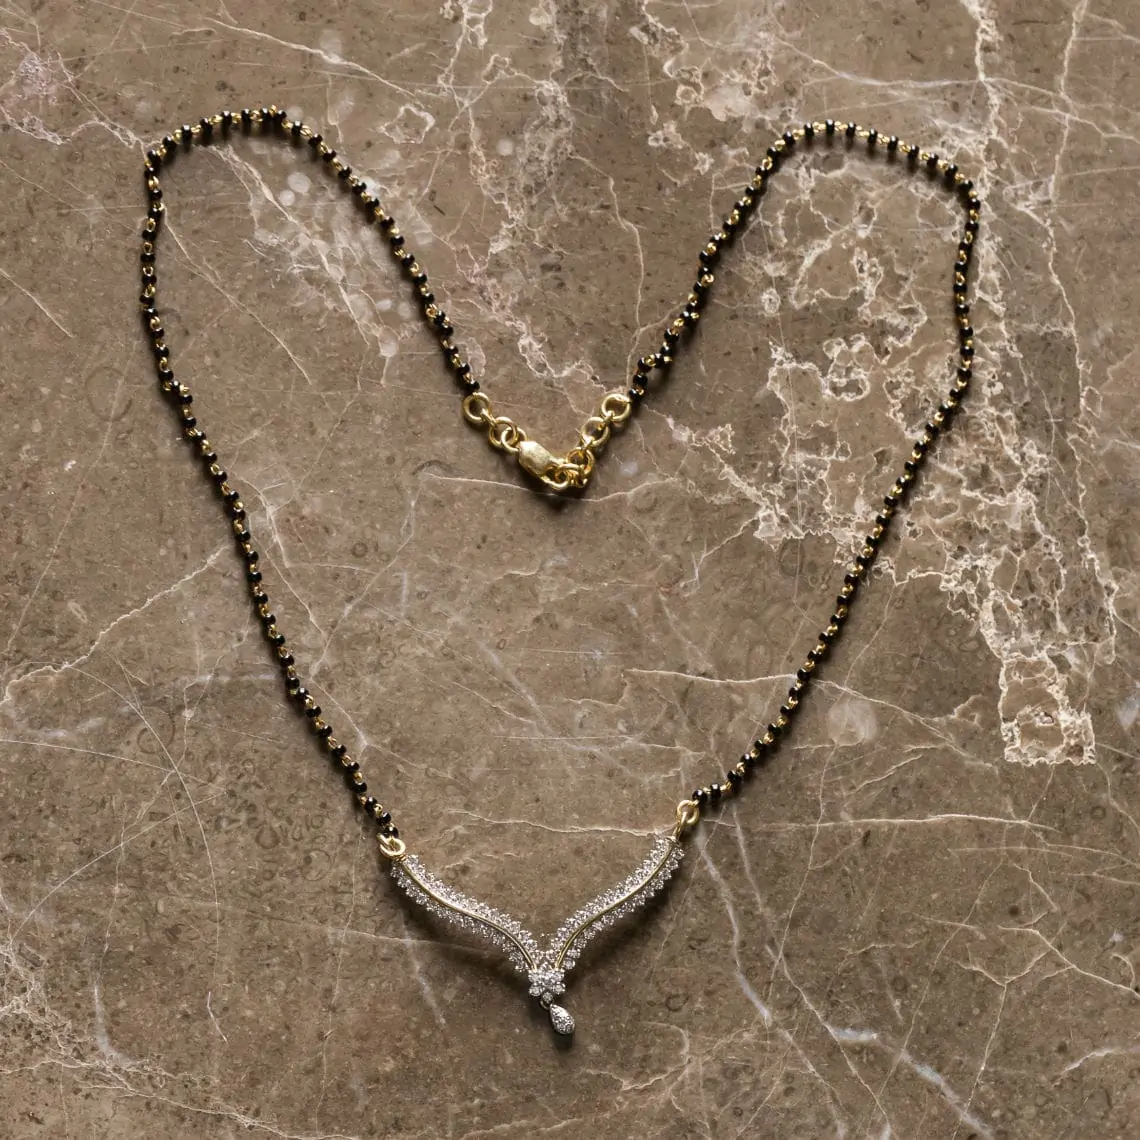 necklace laid out in the shape of a heart